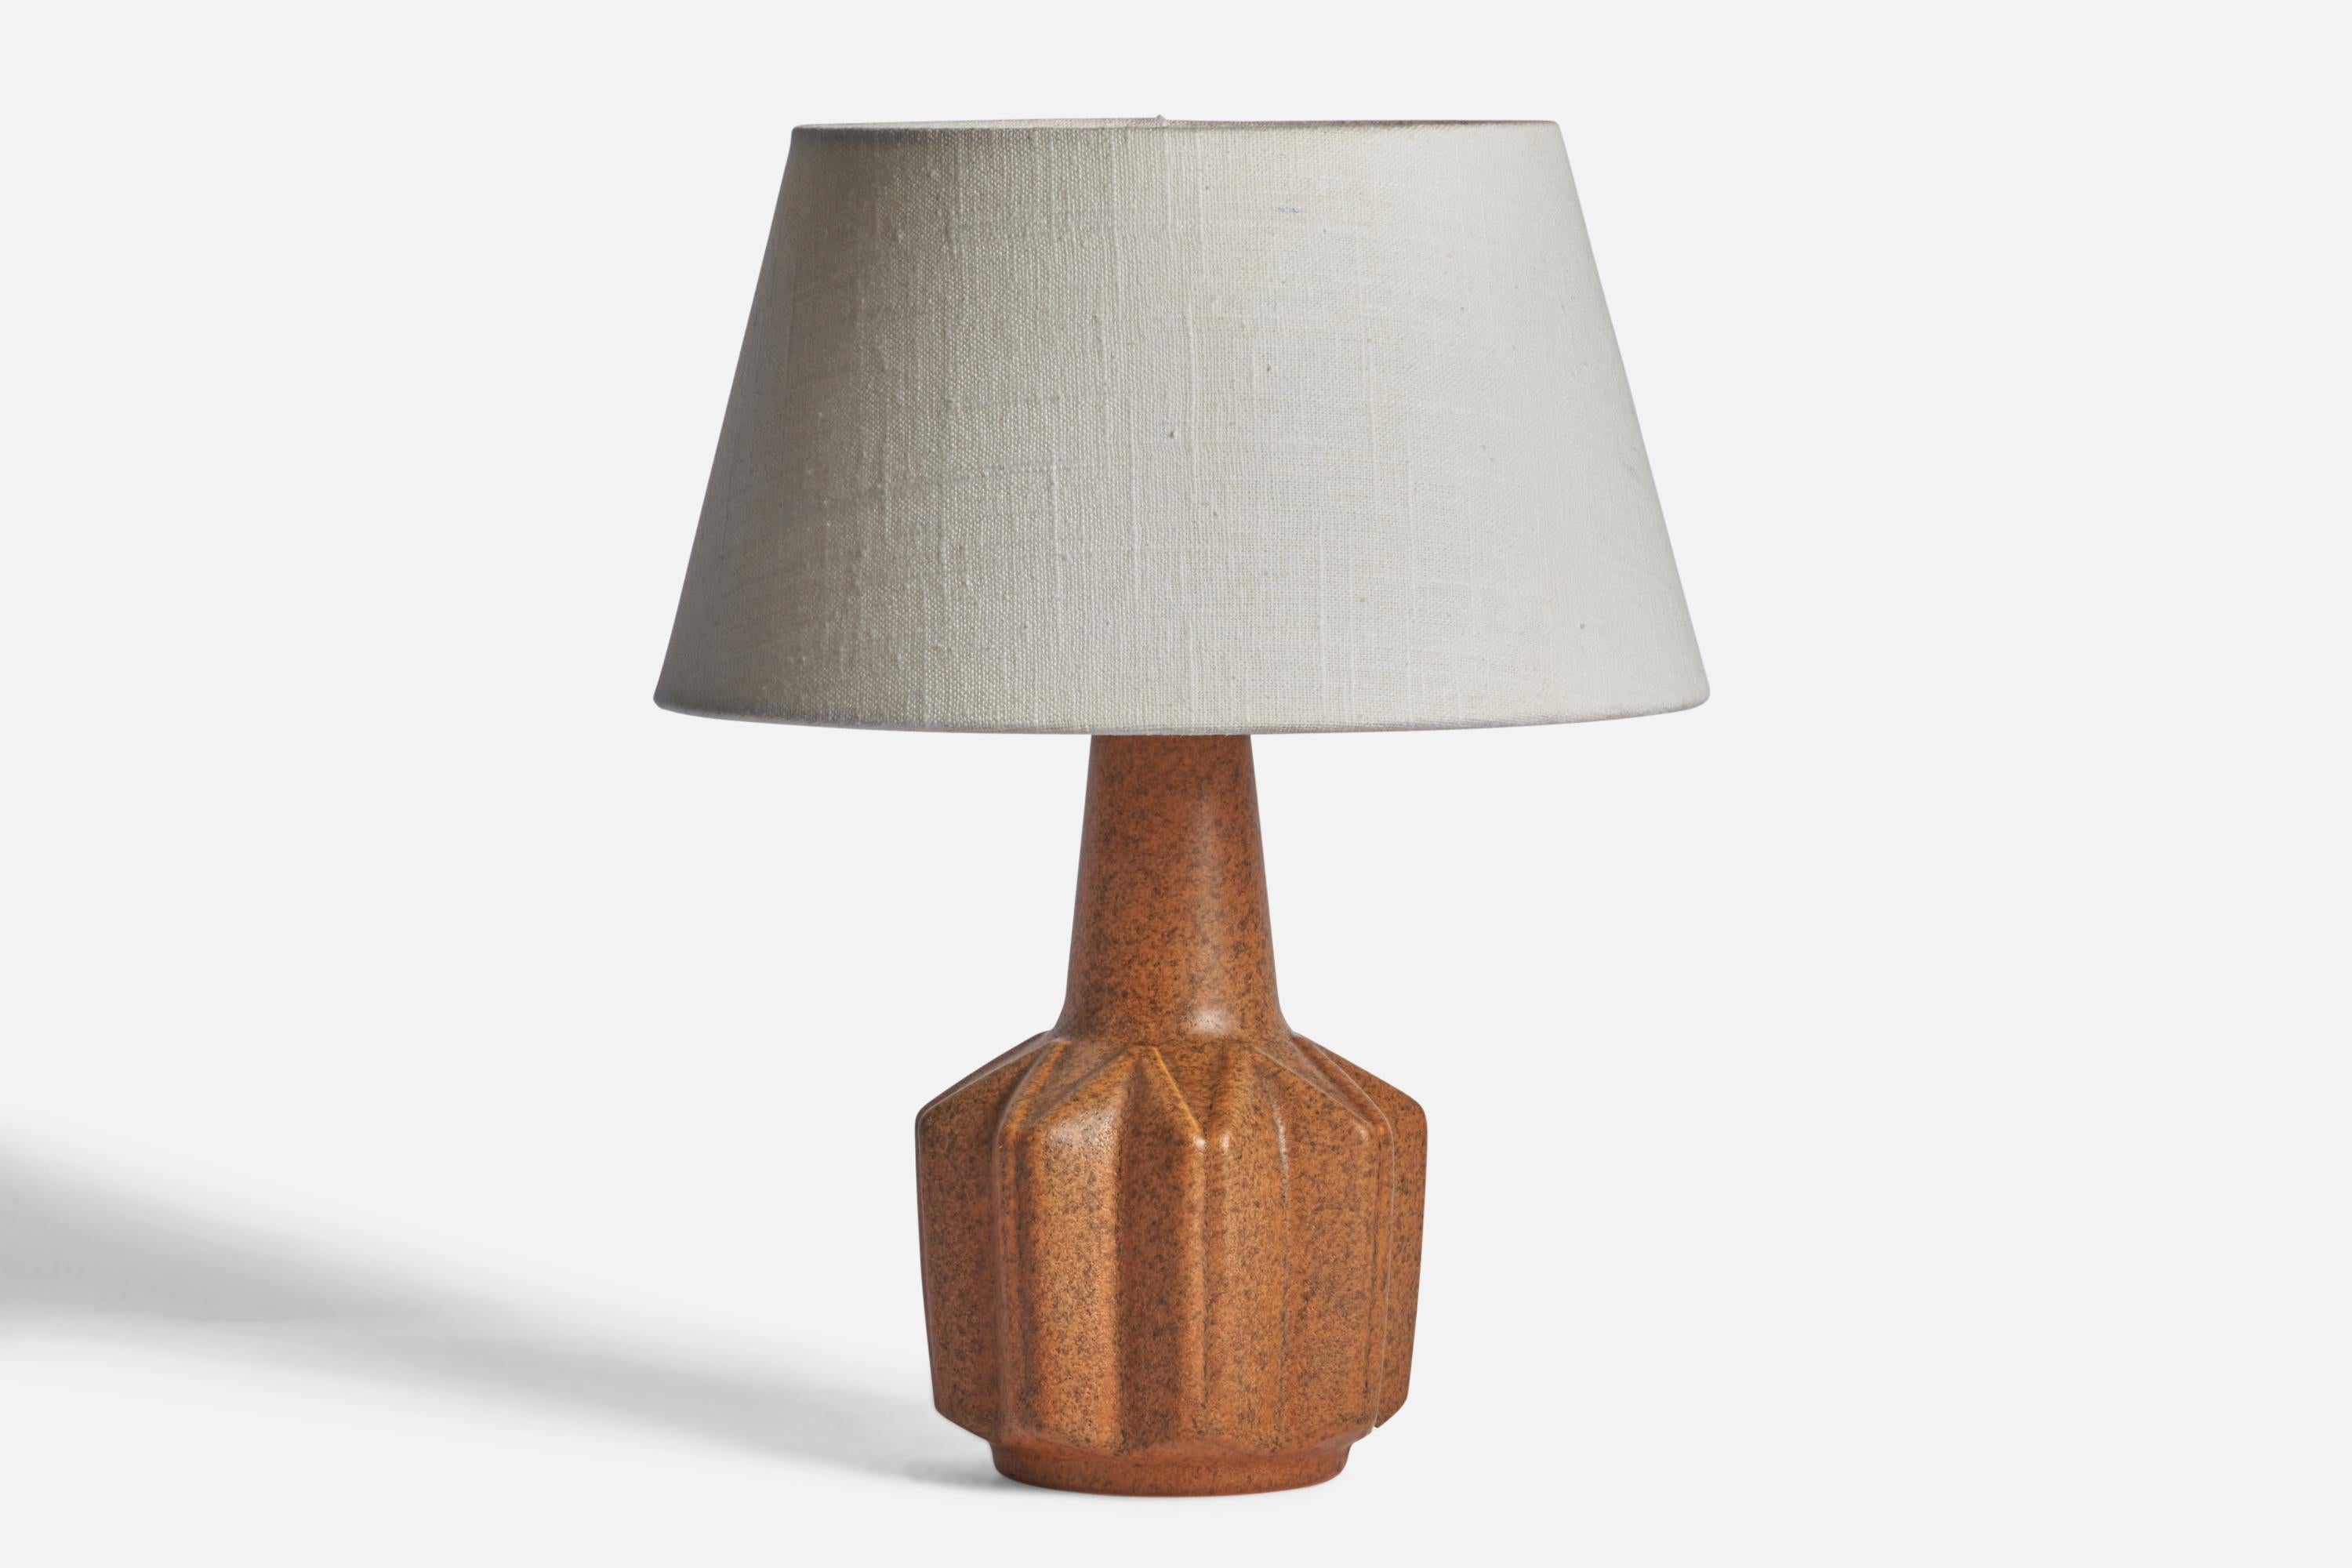 
A matte brown-glazed stoneware table lamp designed and produced by 
Søholm, Bornholm, Denmark, 1960s

Dimensions of Lamp (inches): 10